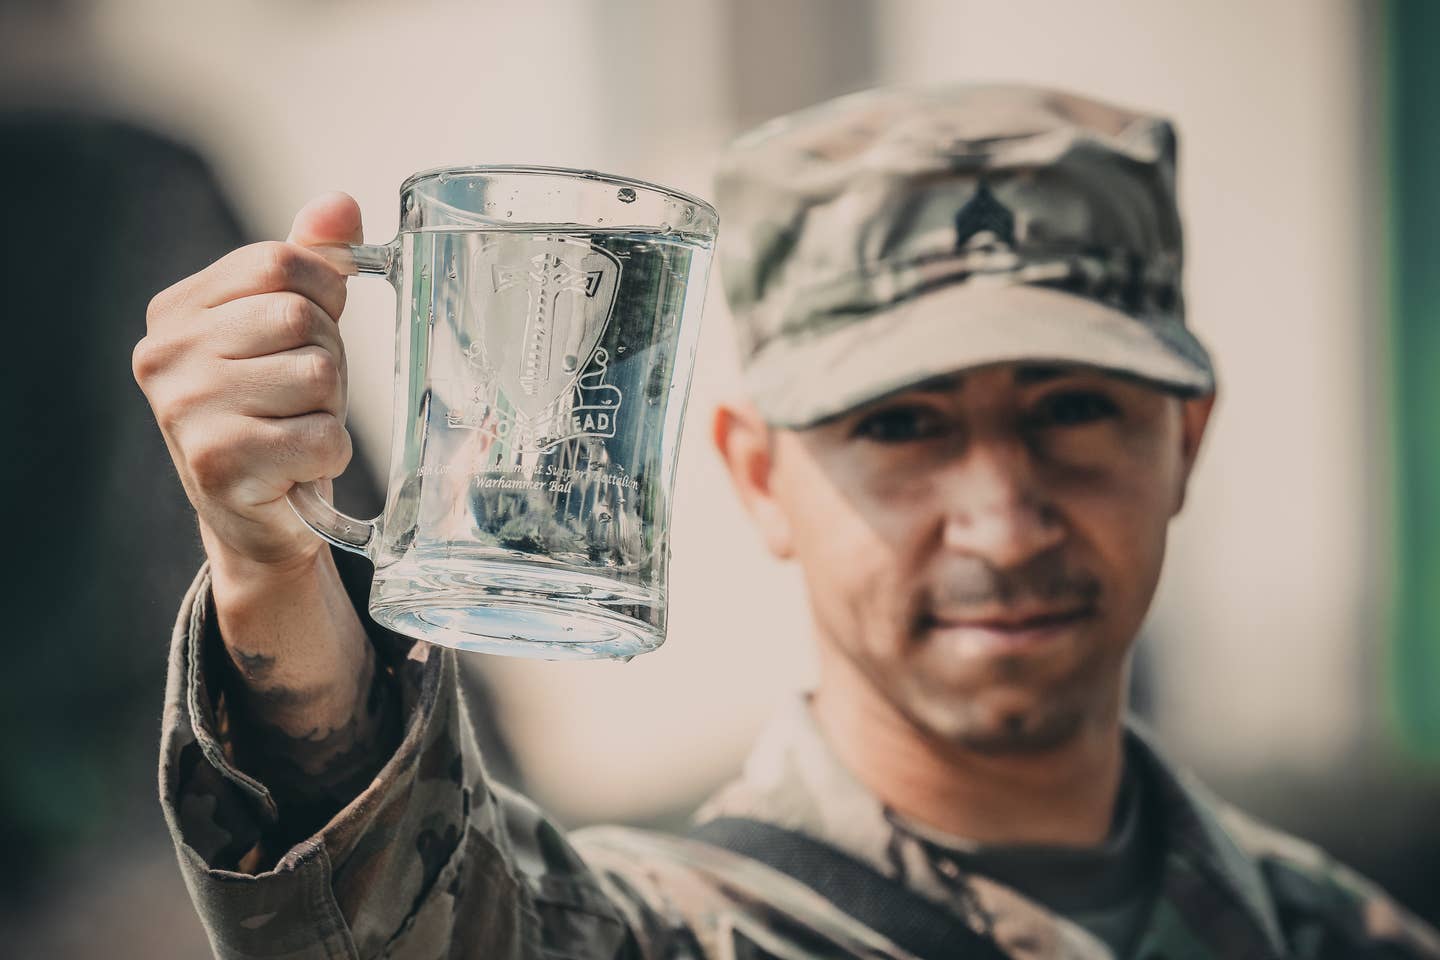 Please don't let that be a mug of vodka. I mean, I know the dude in the photo is a sergeant and is experienced enough to handle it, but still. (For the record, it's a water guy holding a mug of water.) (U.S. Army Spc. Aaron Goode)